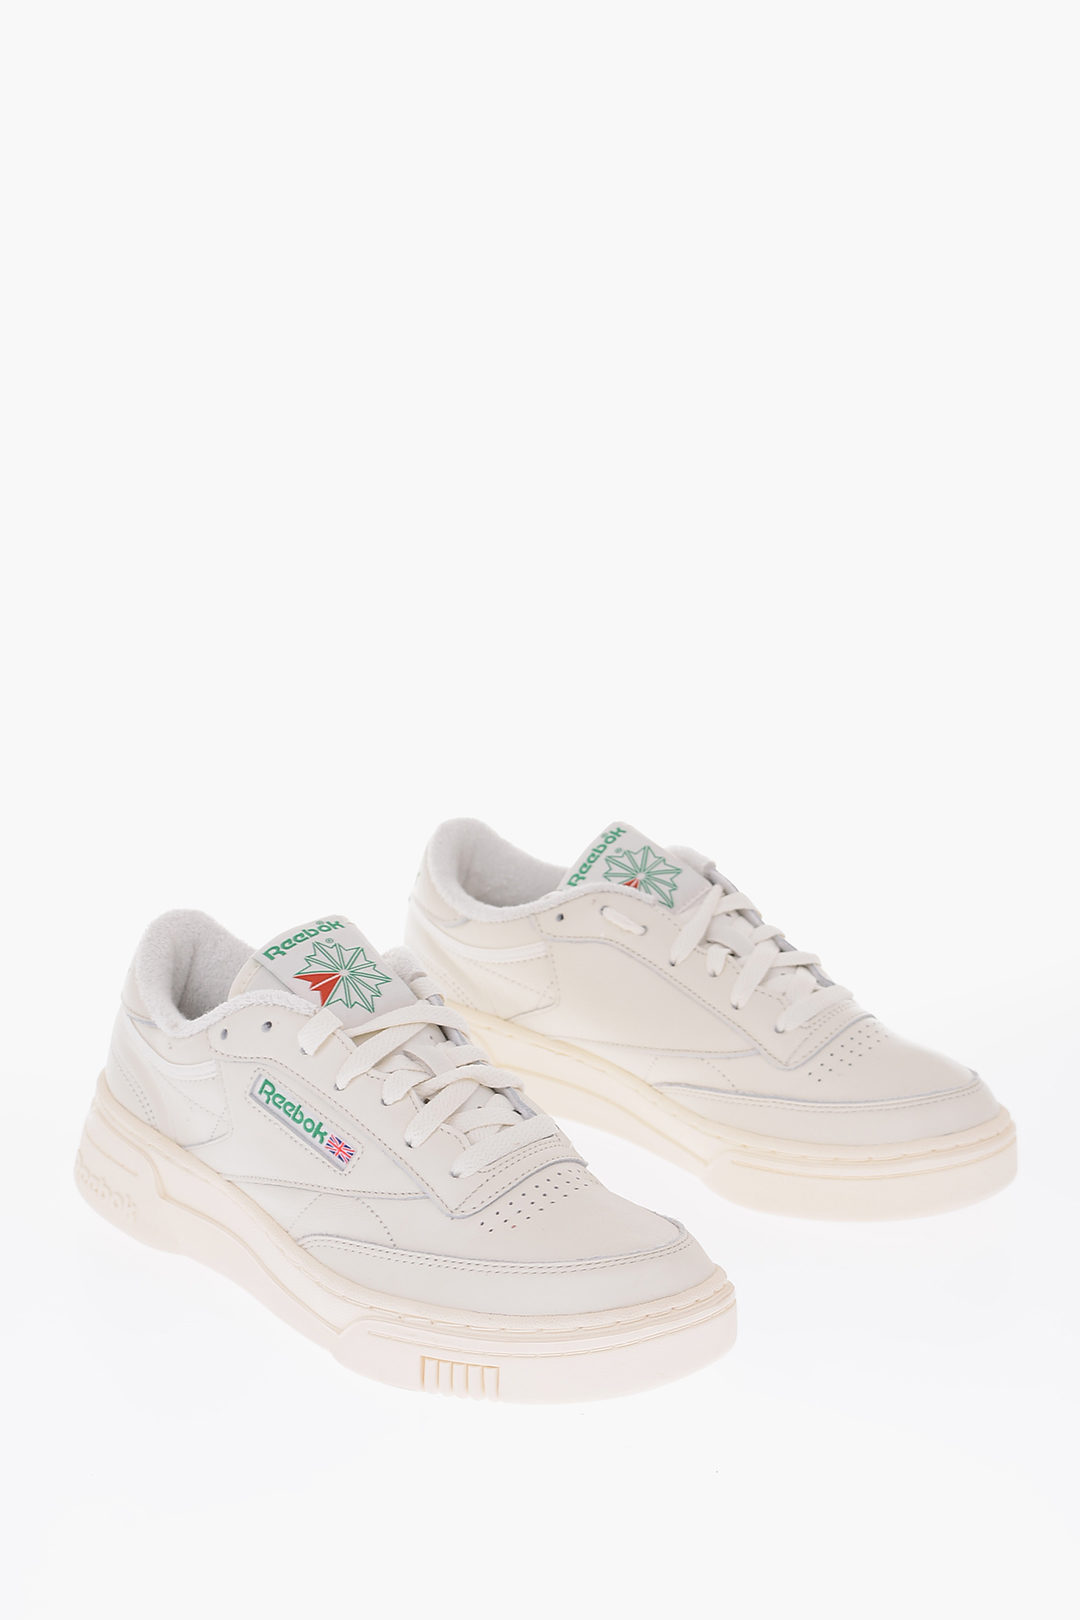 Reebok leather CLUB C STACKED sneakers men women - Glamood Outlet